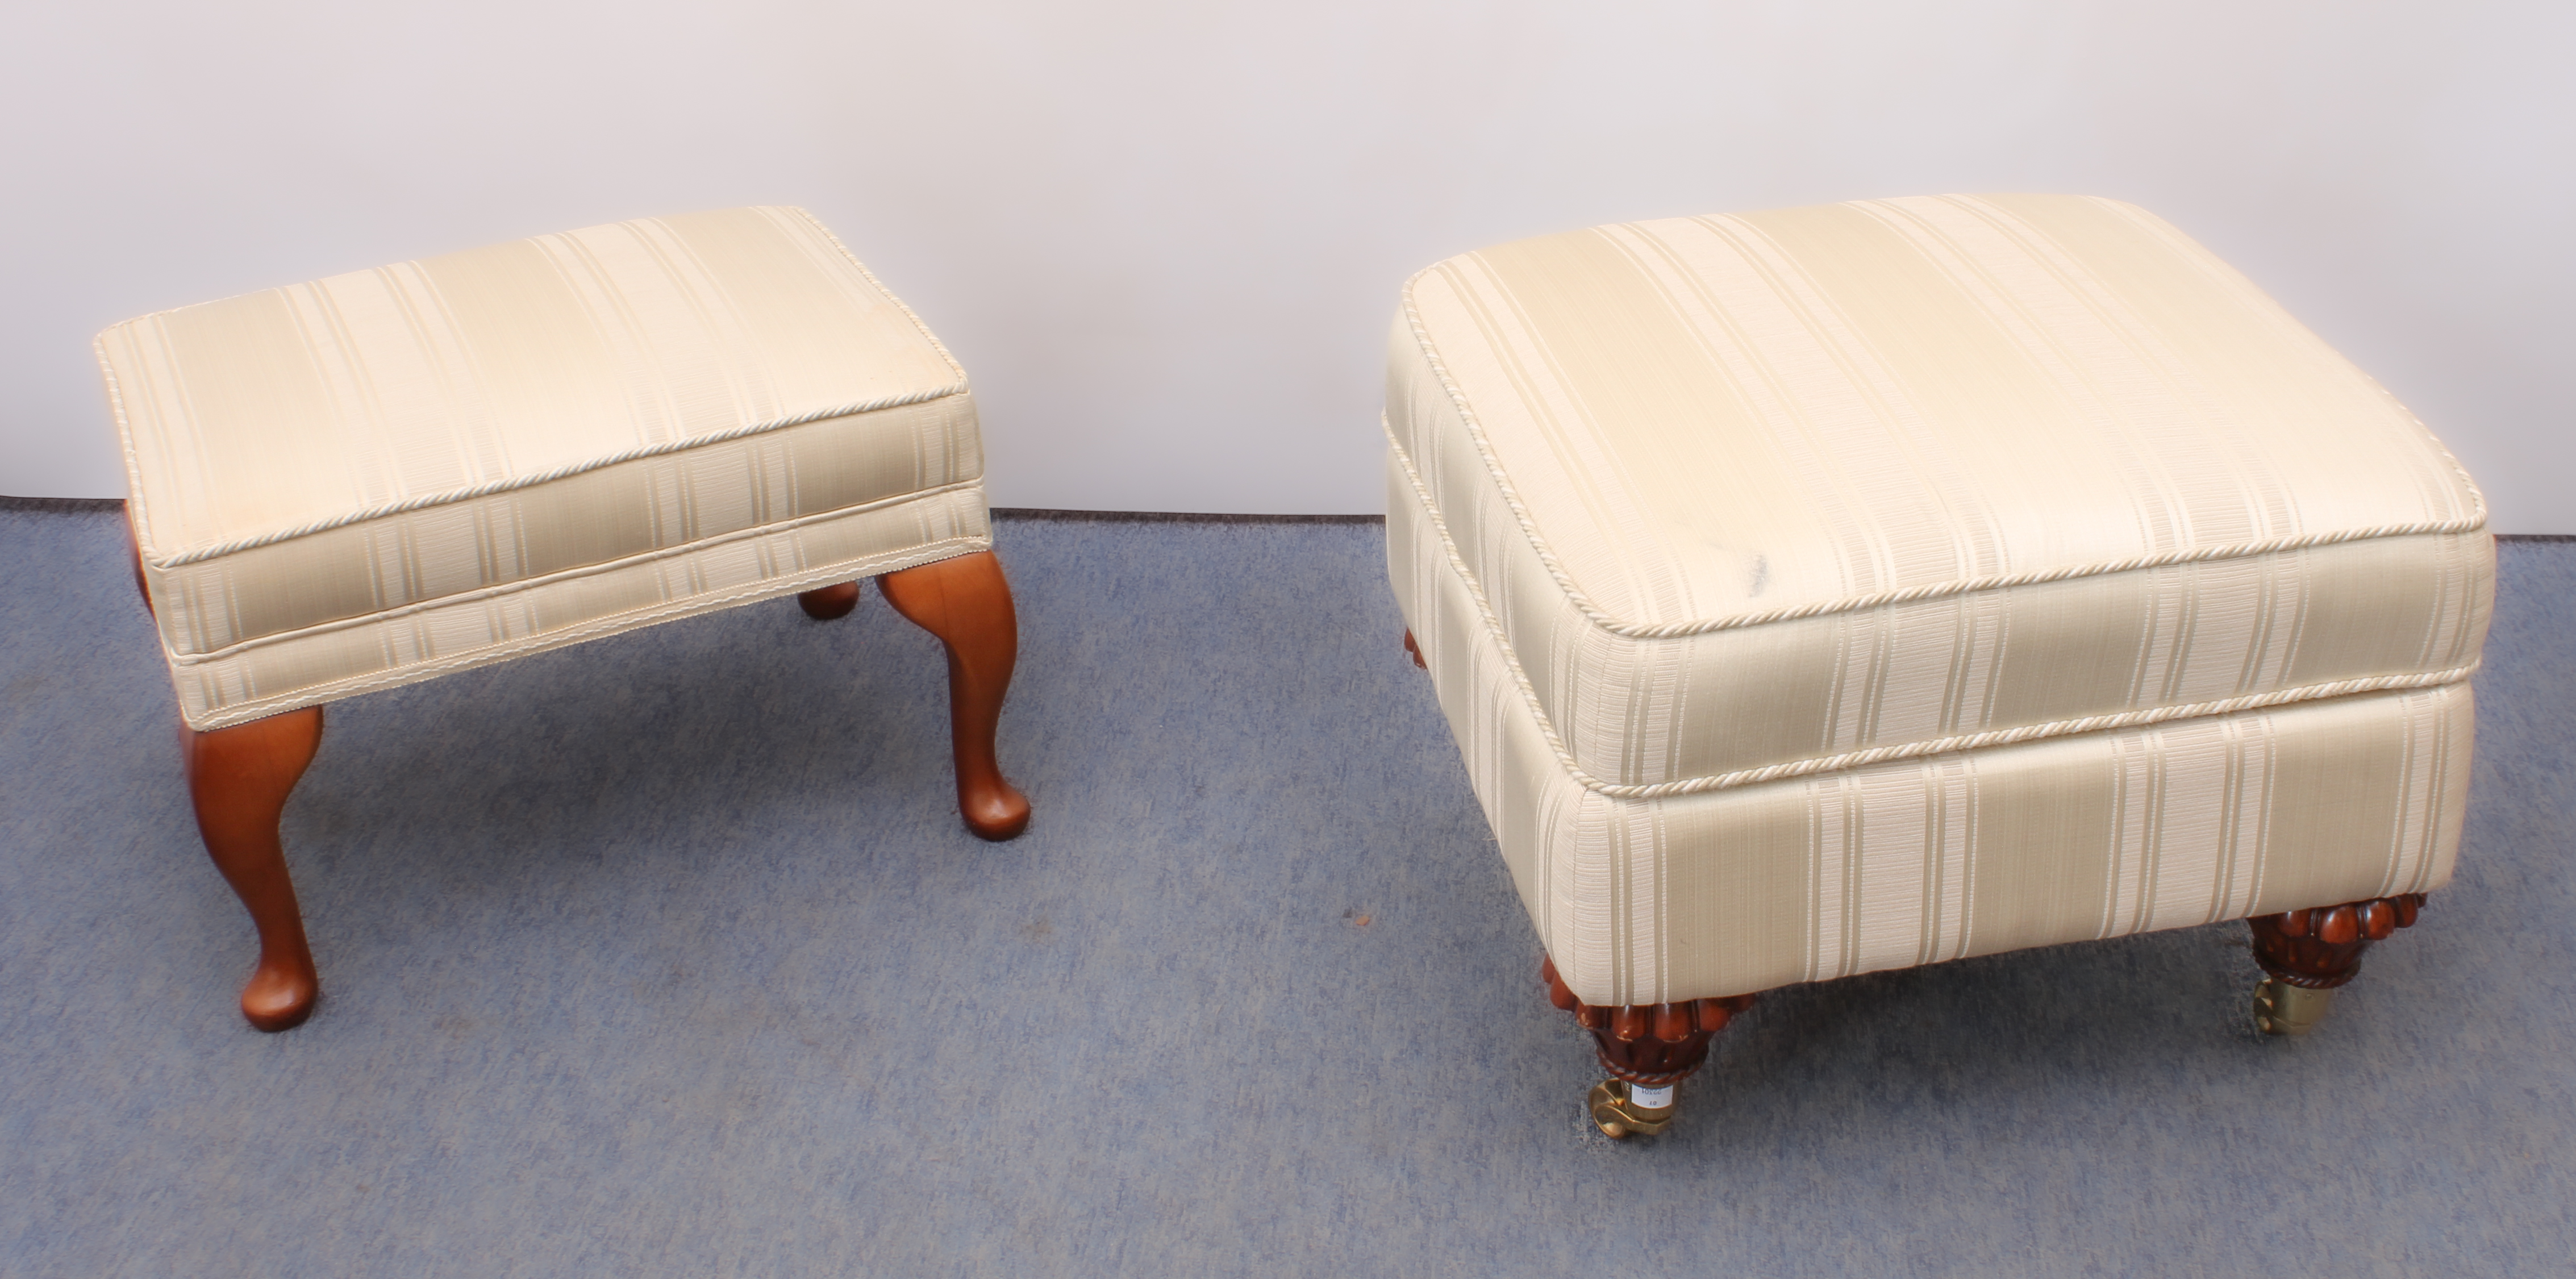 Two pieces: an antique-style upholstered box-stool - the lifting seat with storage beneath, in ivory